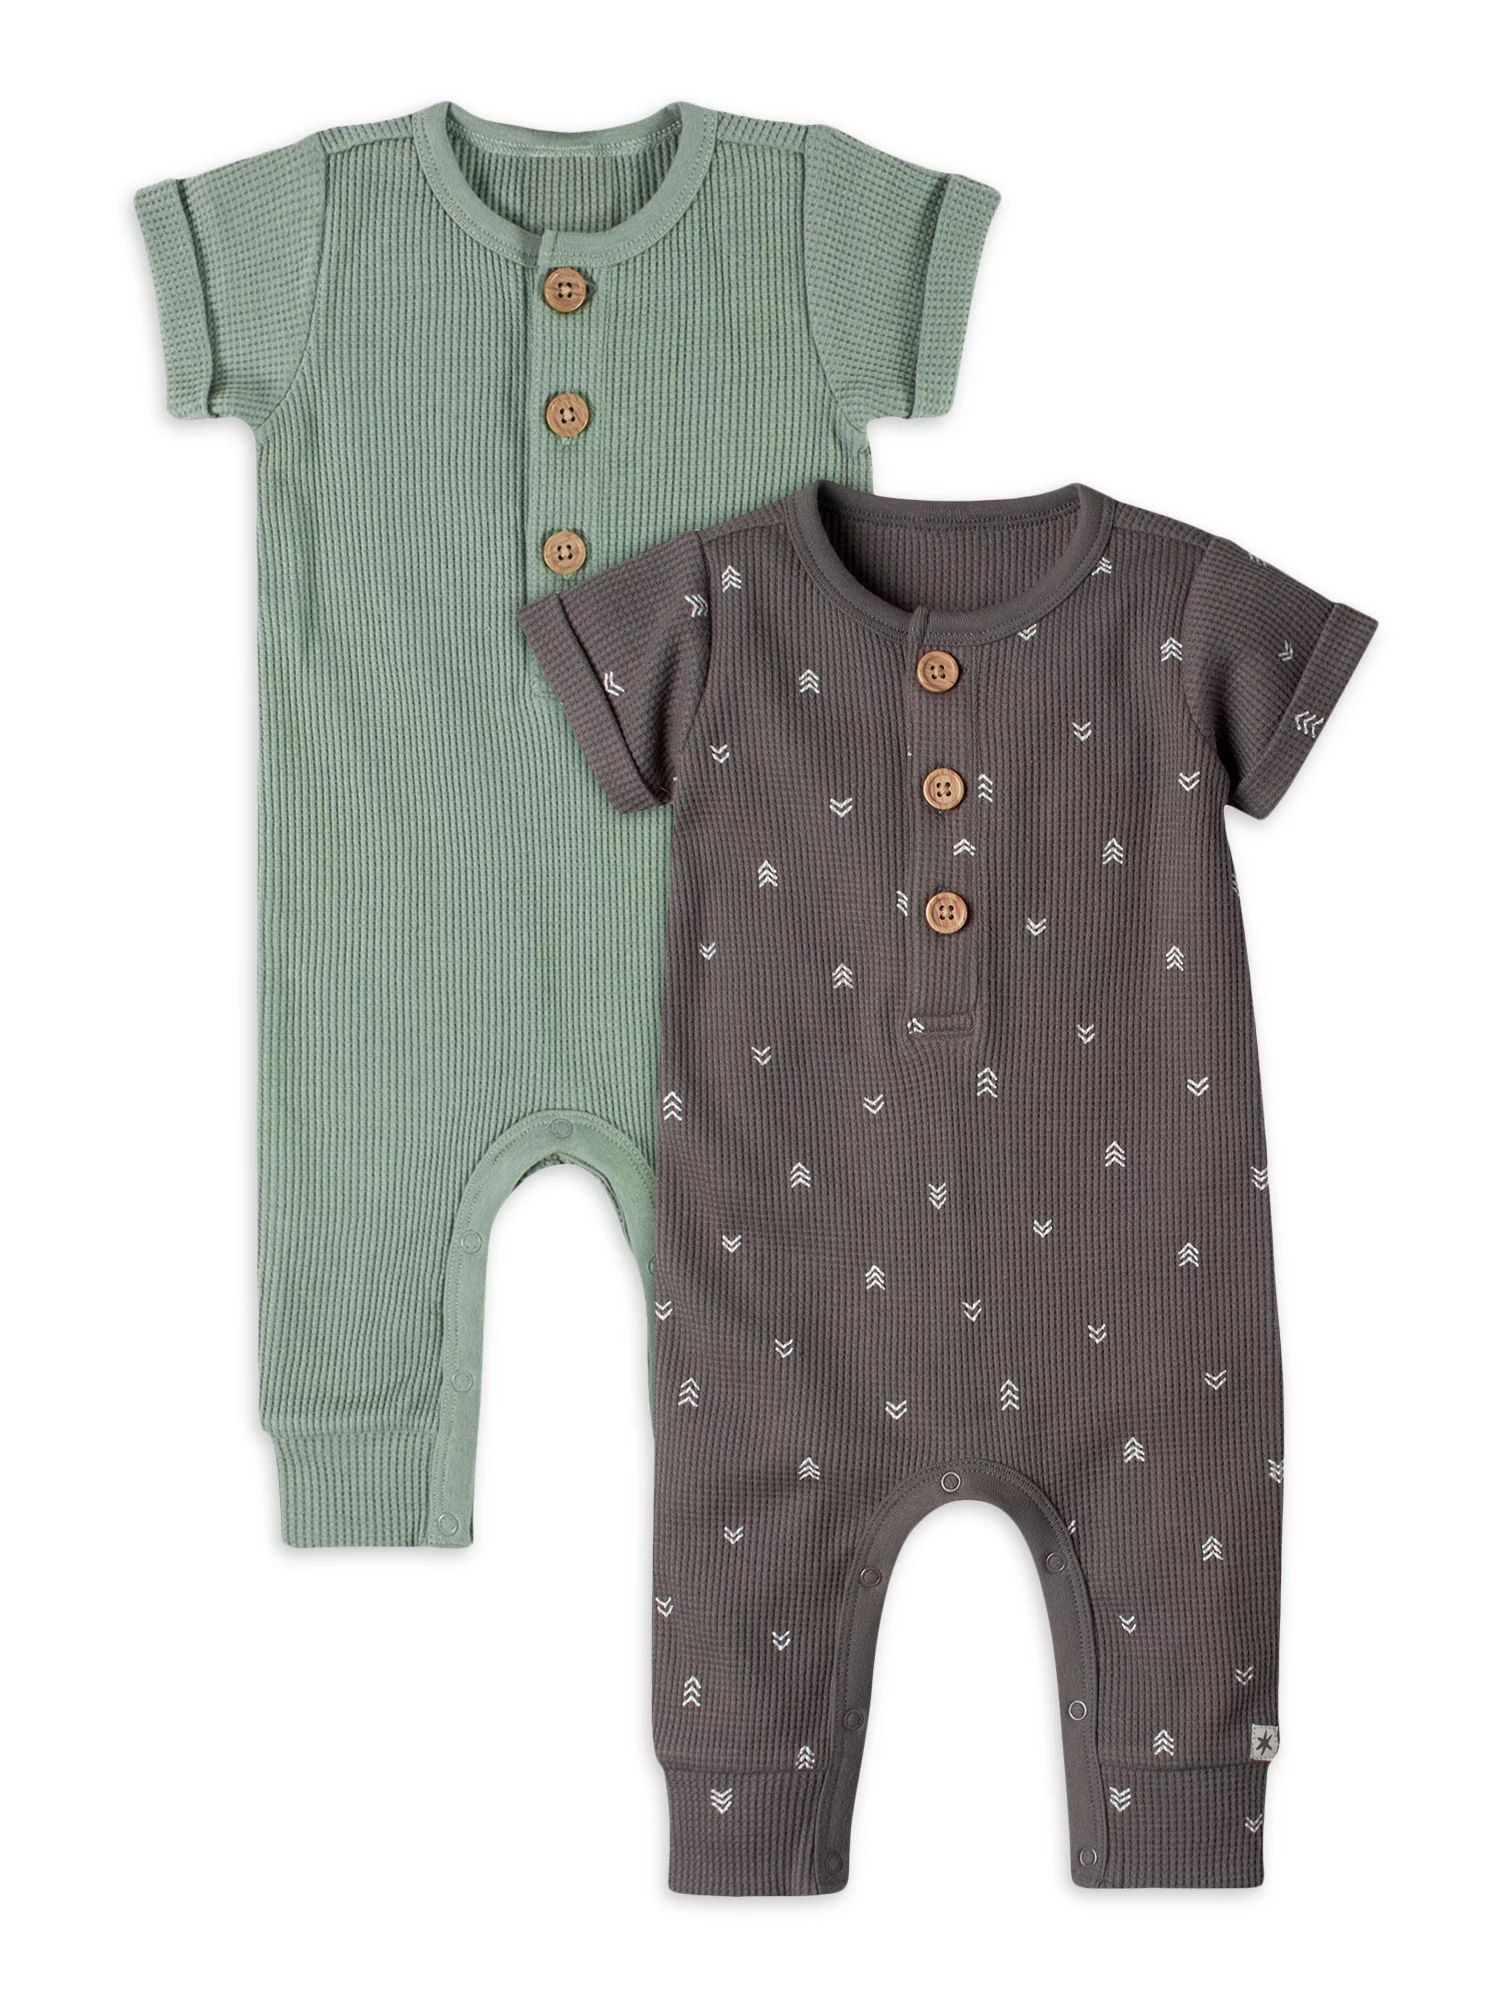 Modern Moments by Gerber Baby Boy Waffle Romper, 2-Pack, Sizes 0/3 -24 Months | Walmart (US)